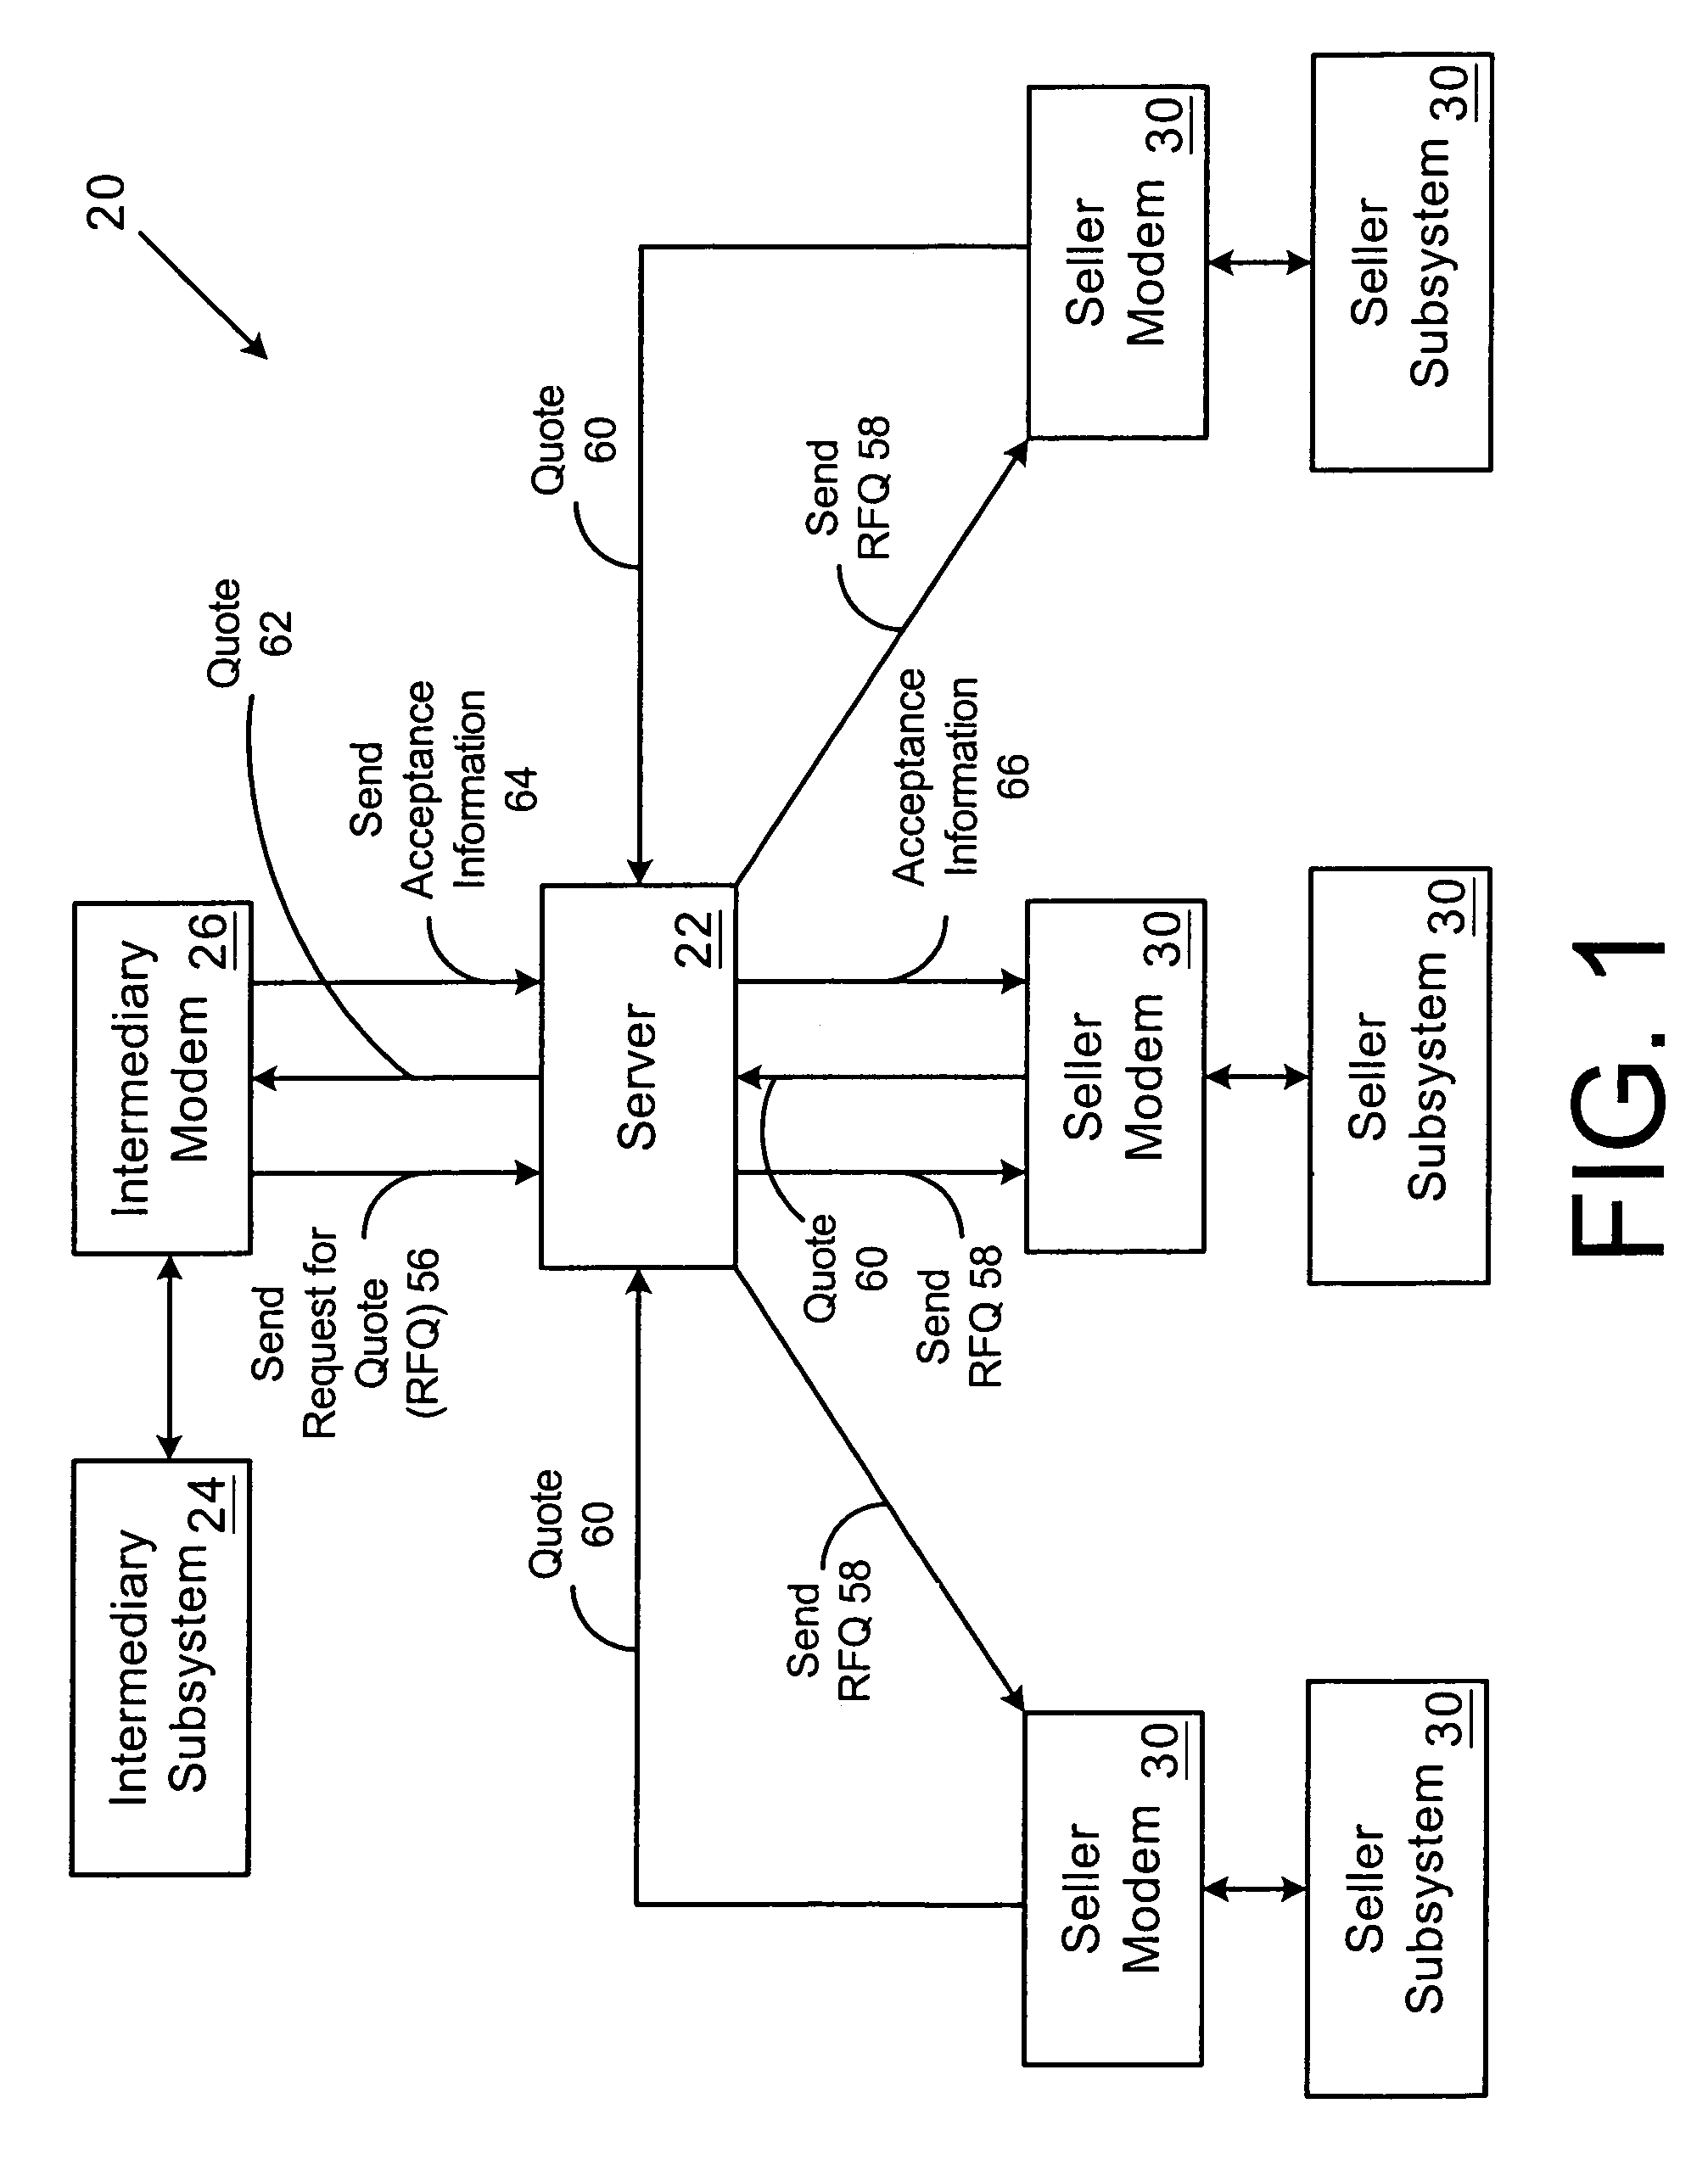 Hierarchical data structure for vehicle identification and configuration data including protected customer data